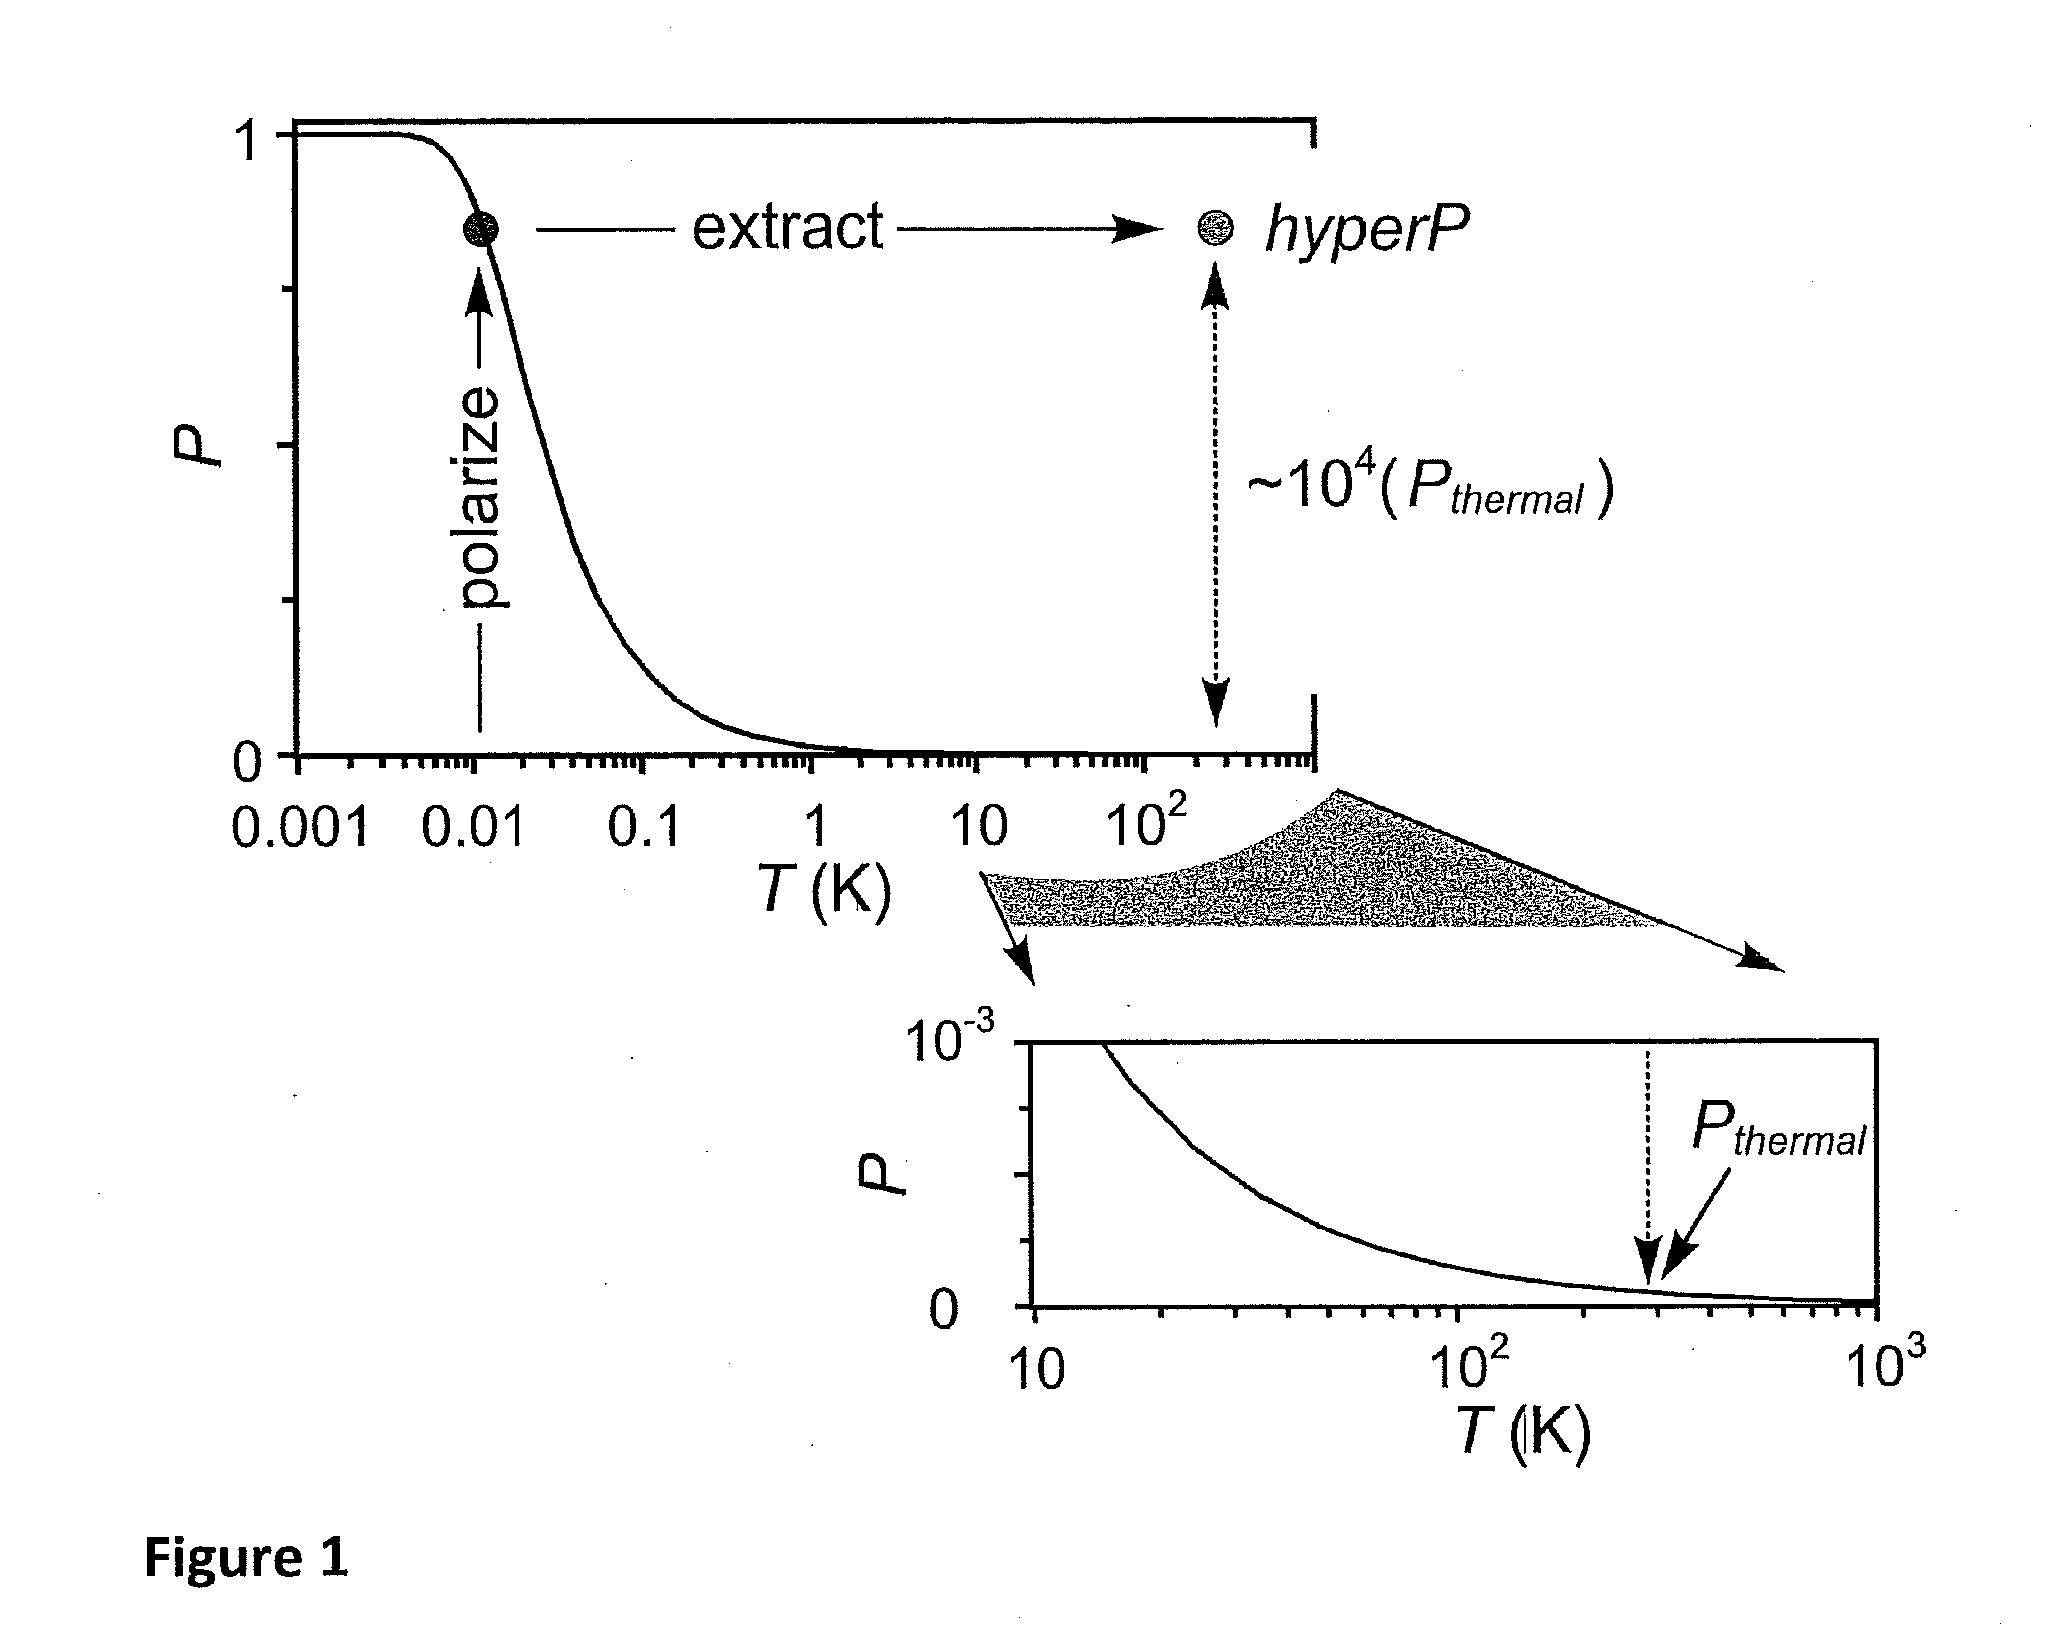 Sample-preparation method to manipulate nuclear spin-relaxation times, including to facilitate ultralow temperature hyperpolarization